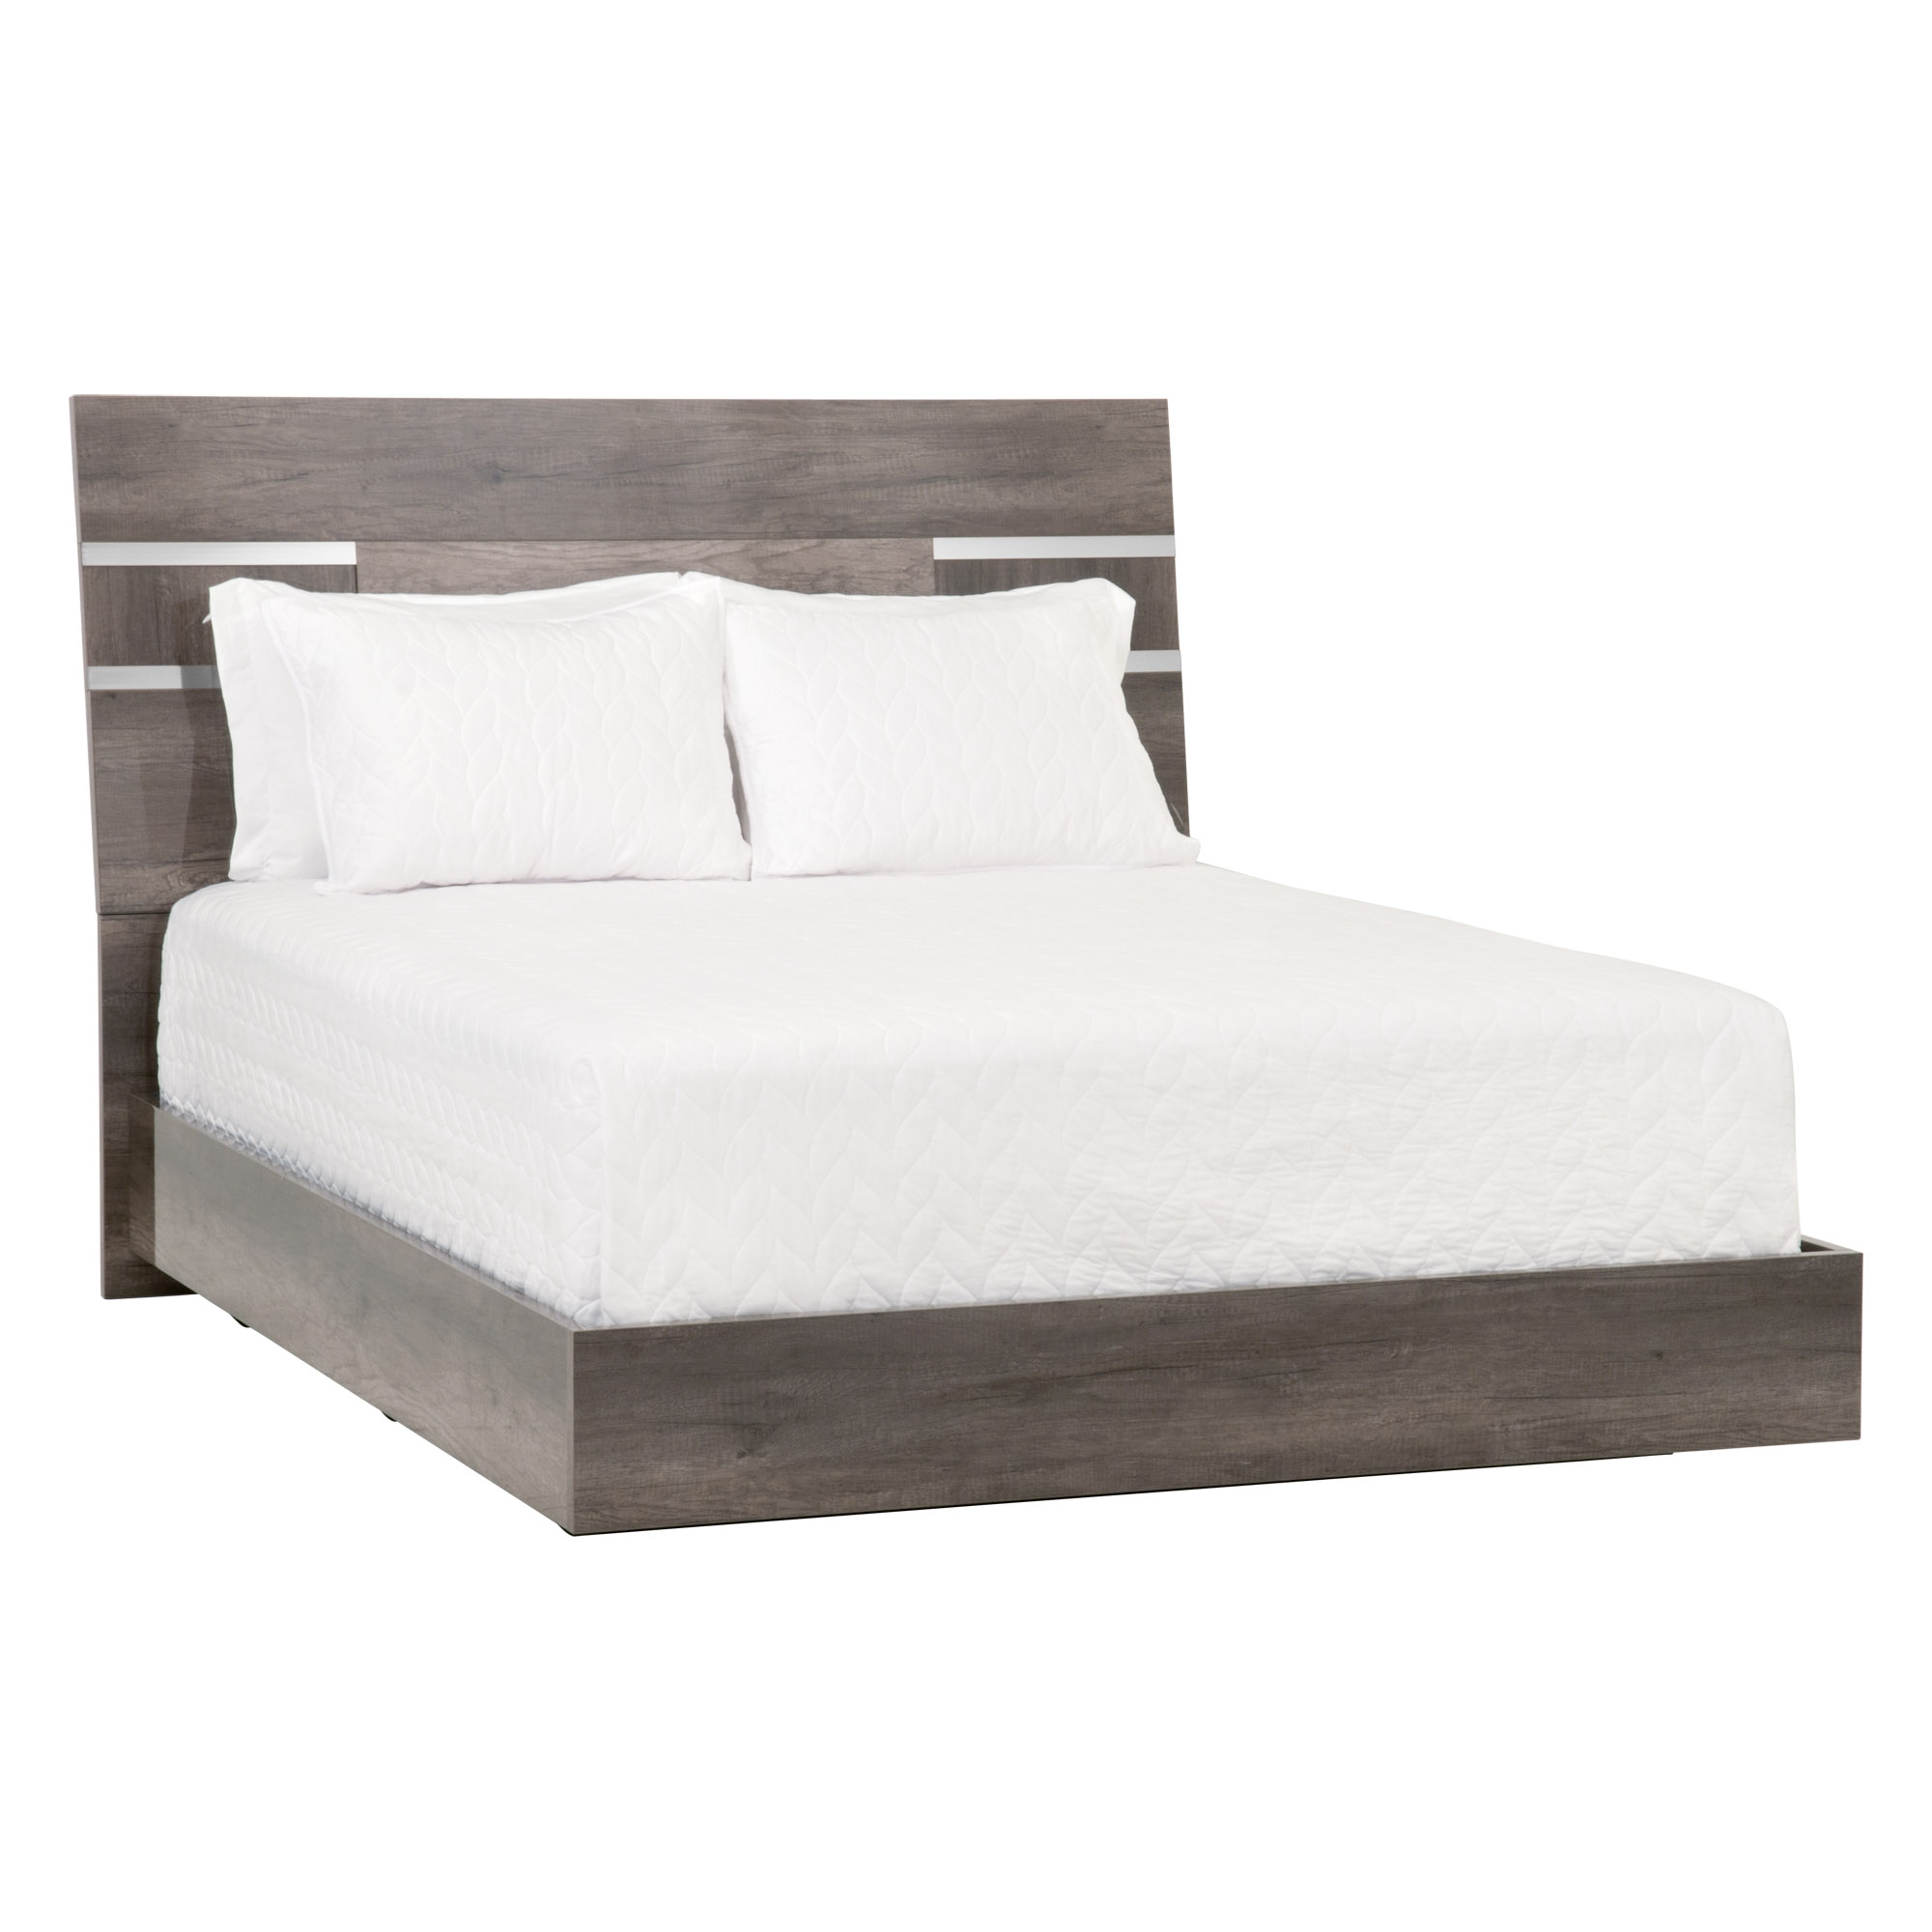 Collina Queen Bed - Image 1